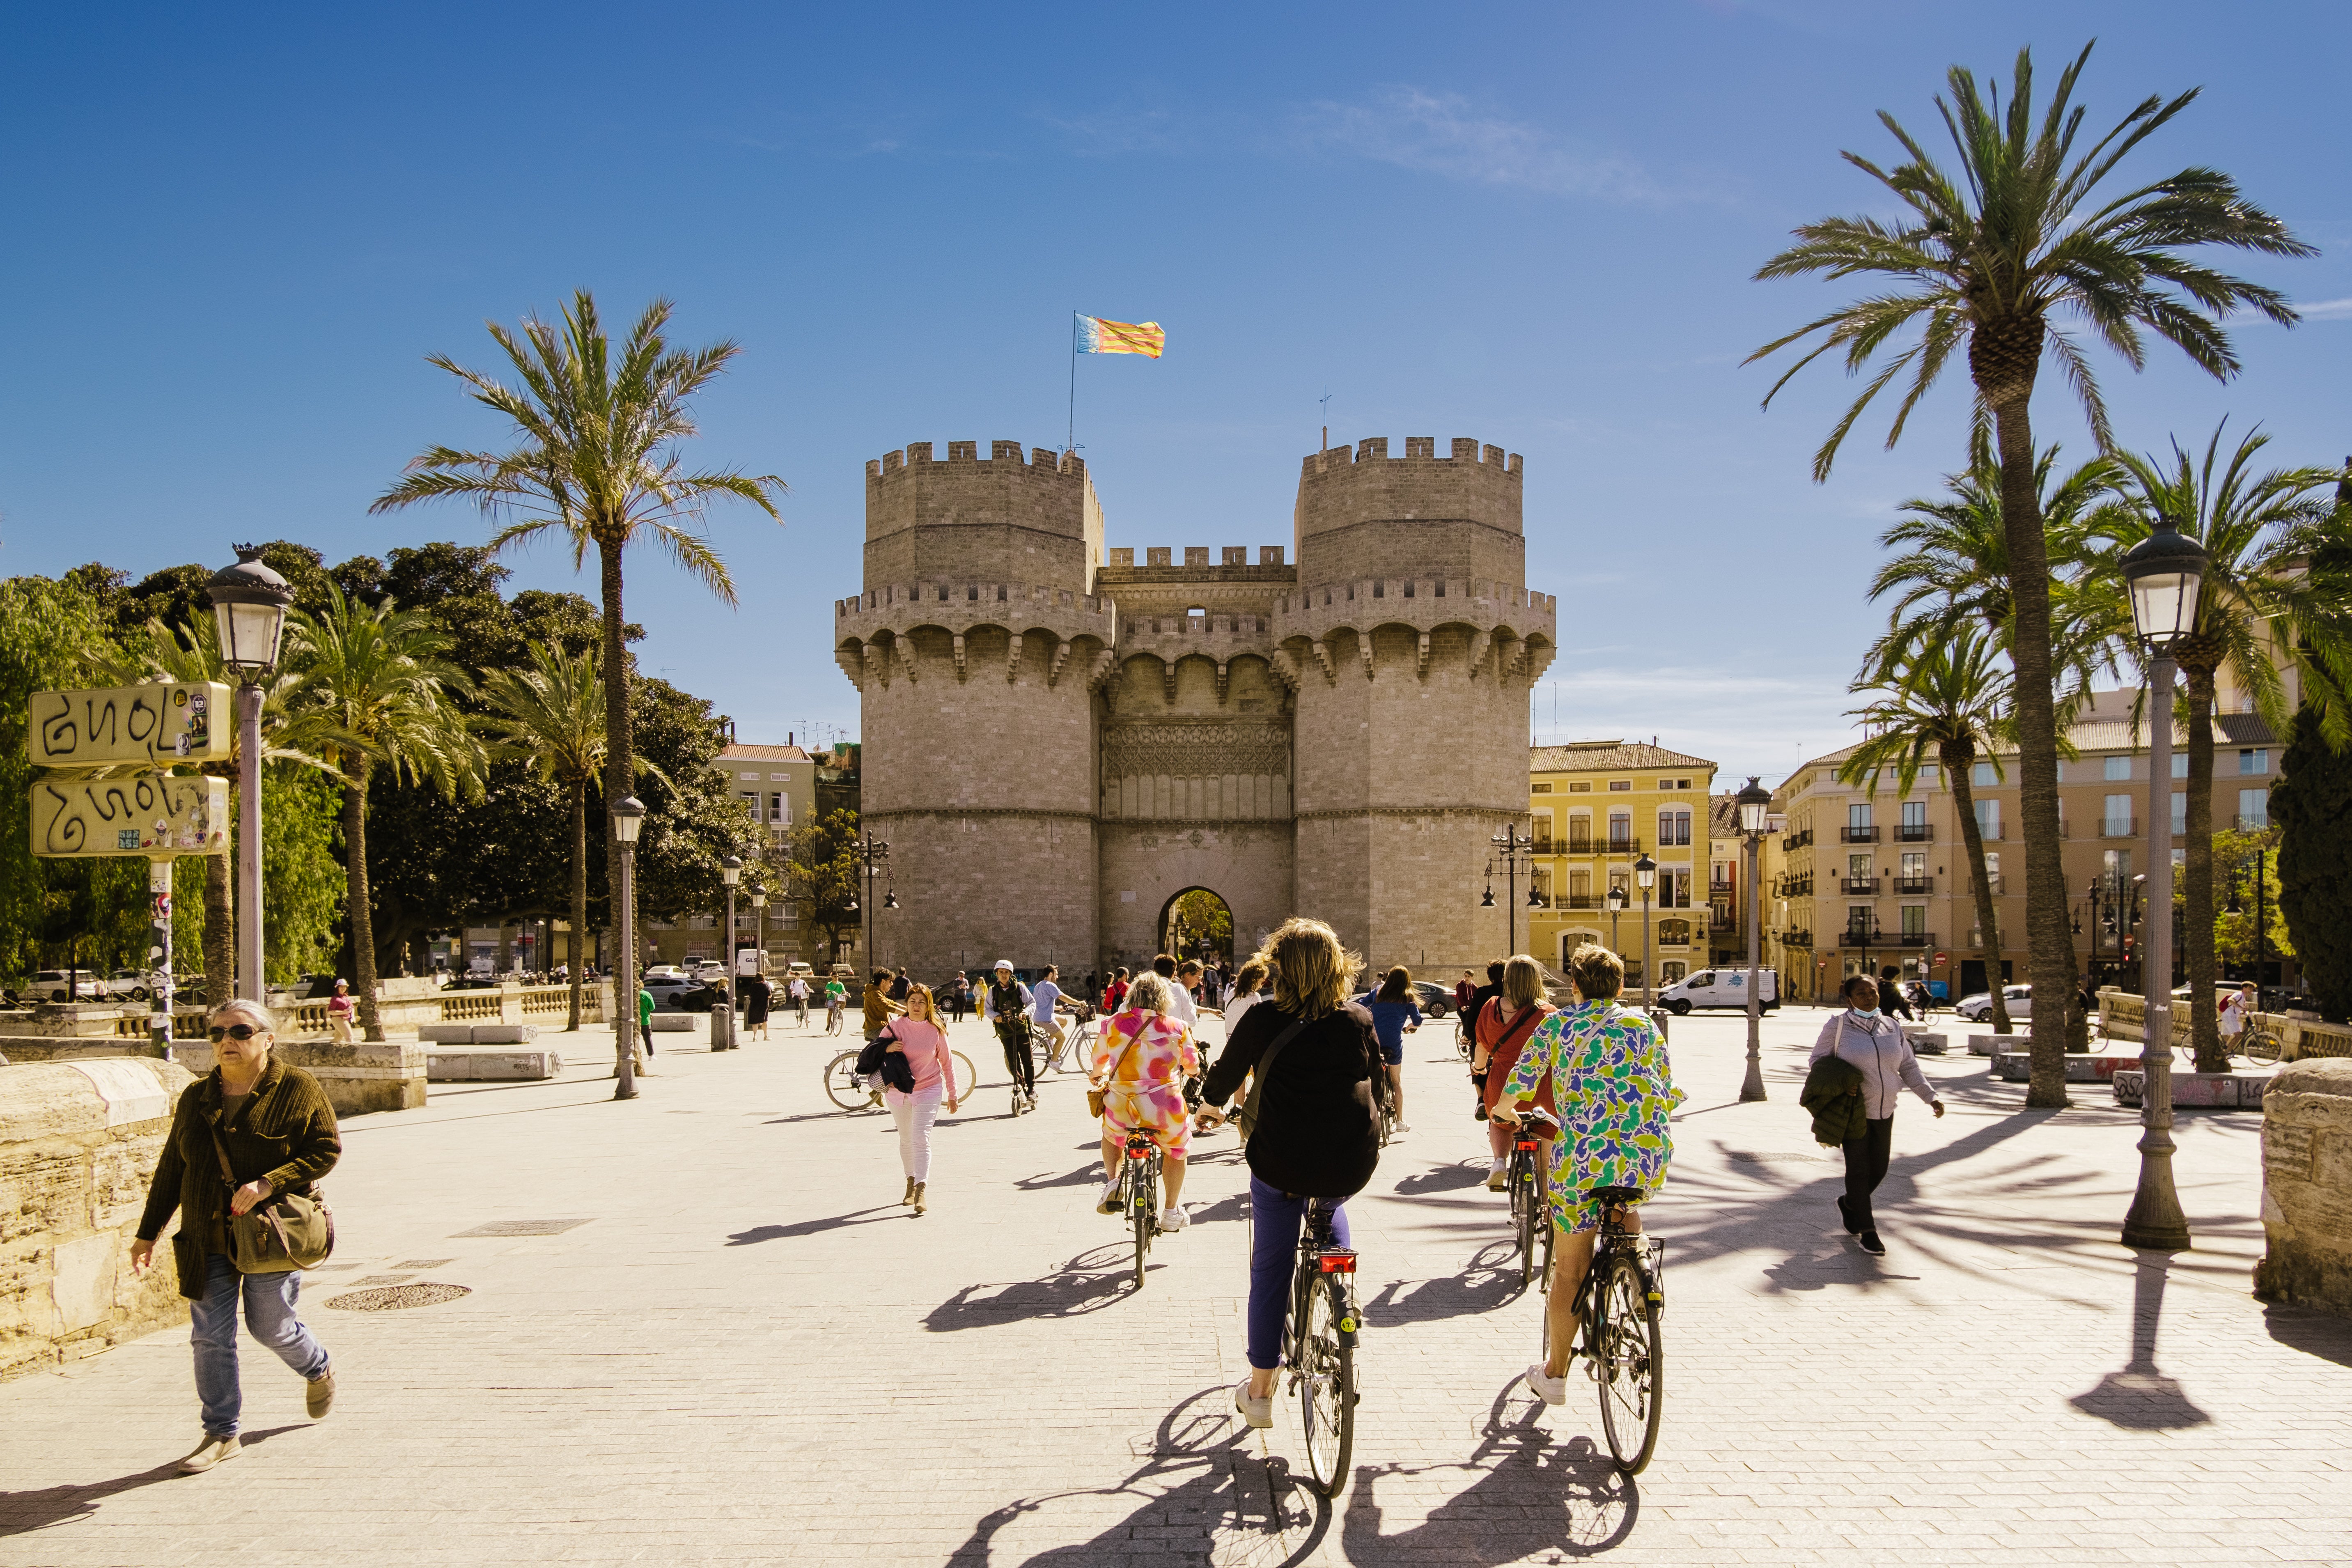 Valencia is a cyclist’s dream, providing a planet-friendly way to explore its many fascinating sites